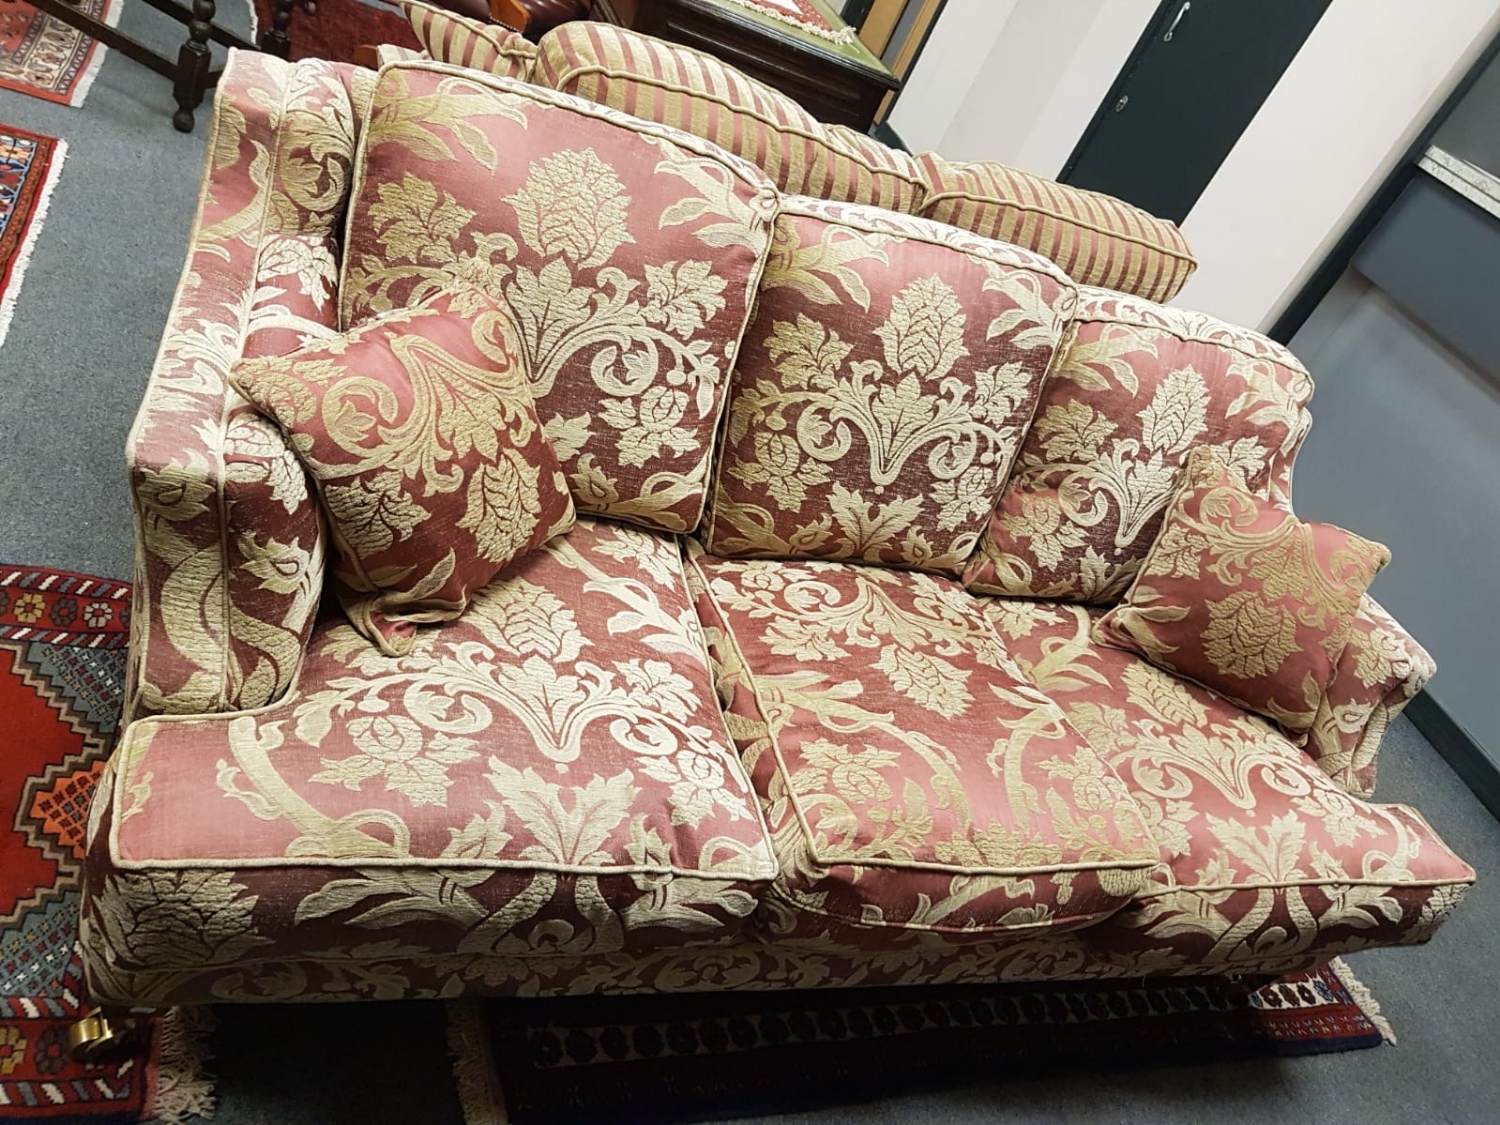 A three seater and two seater classical style settees and footstool by Wade, - Image 2 of 2